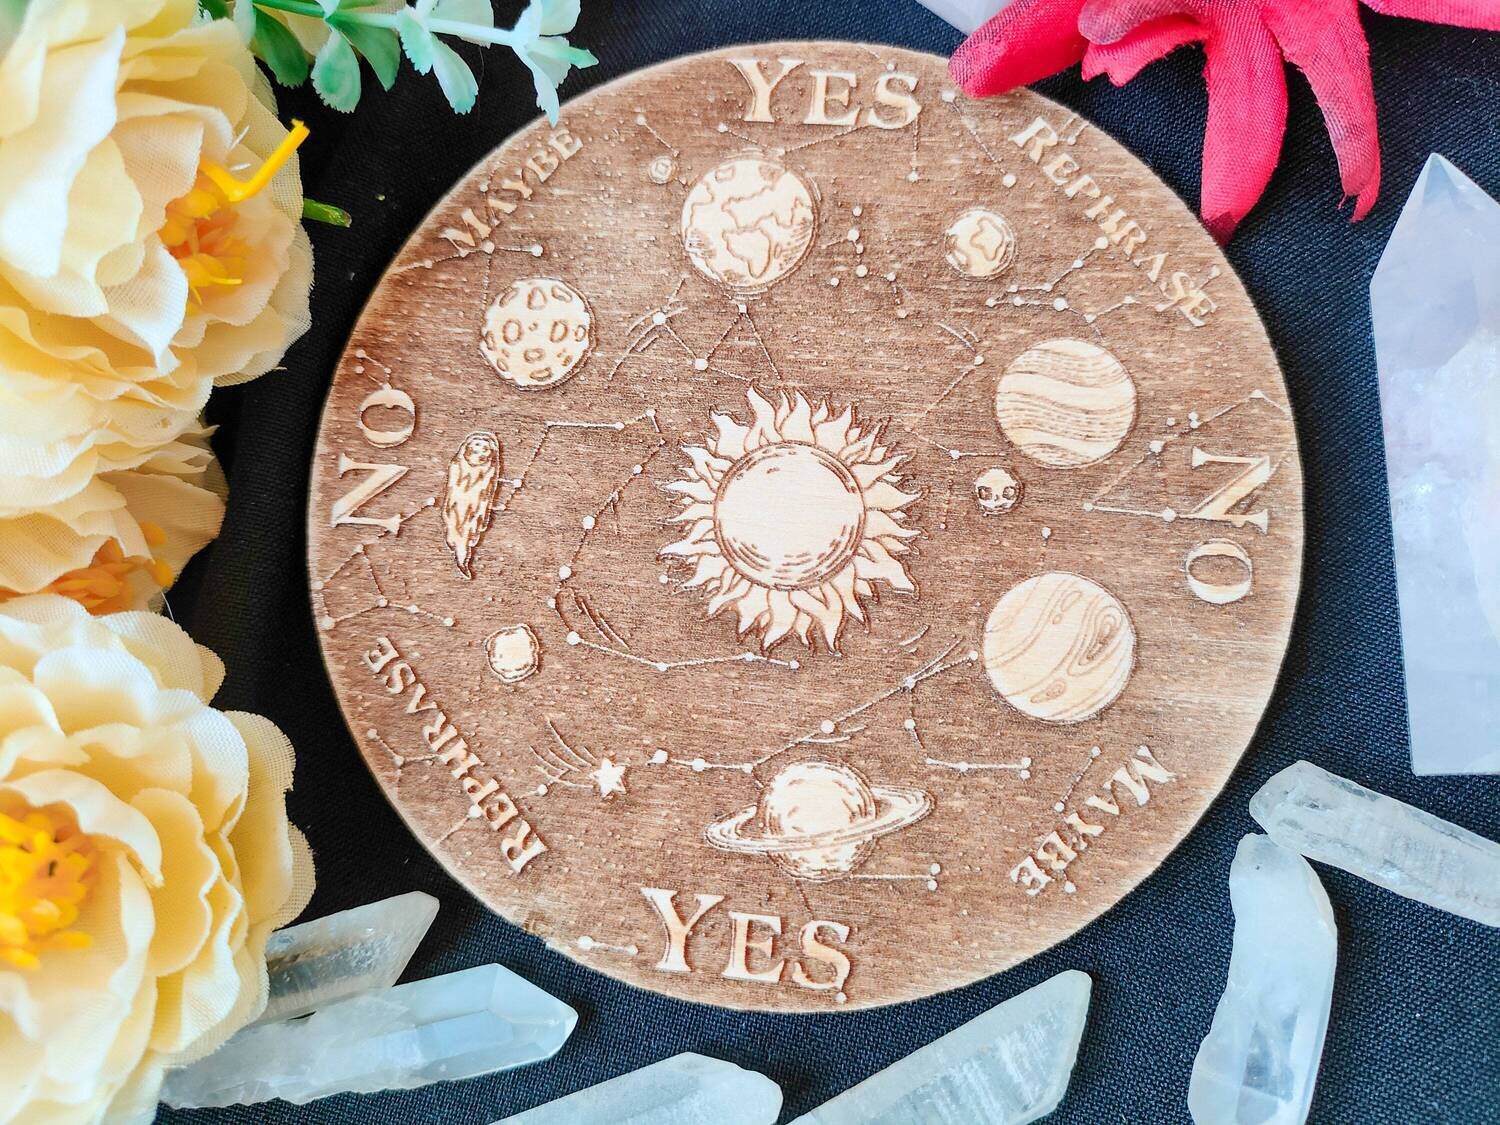 Astrology Pendulum Board with moon and sun for answers, witchcraft divination tools for spirit, altar decor, divination board, 2 gift card